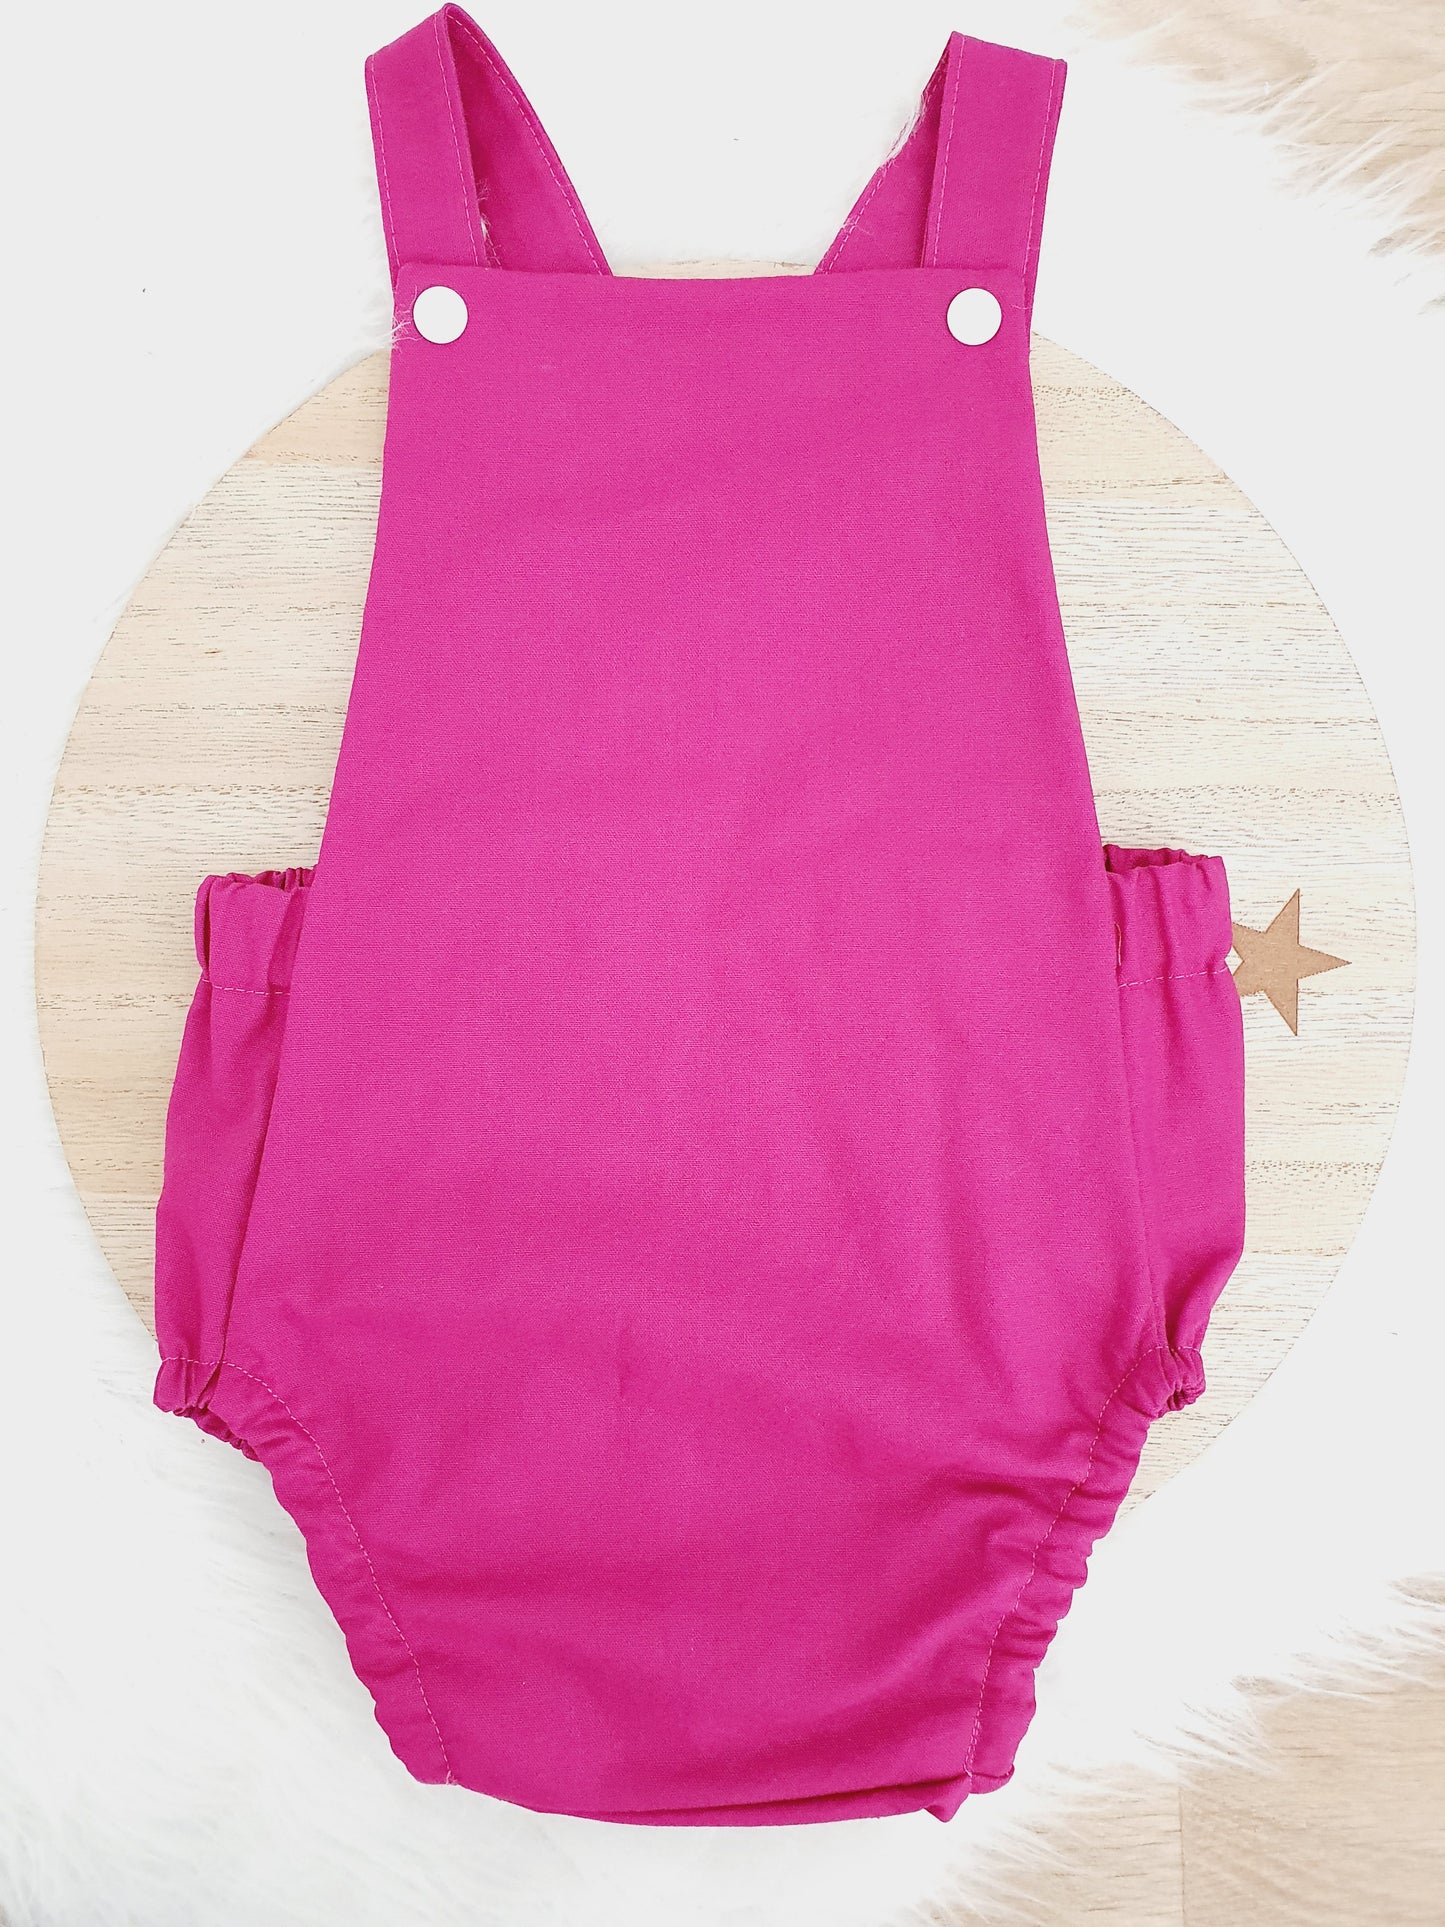 BERRY PINK Baby Romper, Handmade Baby Clothing, Size 0 - 1st Birthday Clothing / Cake Smash Outfit - BERRY, 9 - 12 months